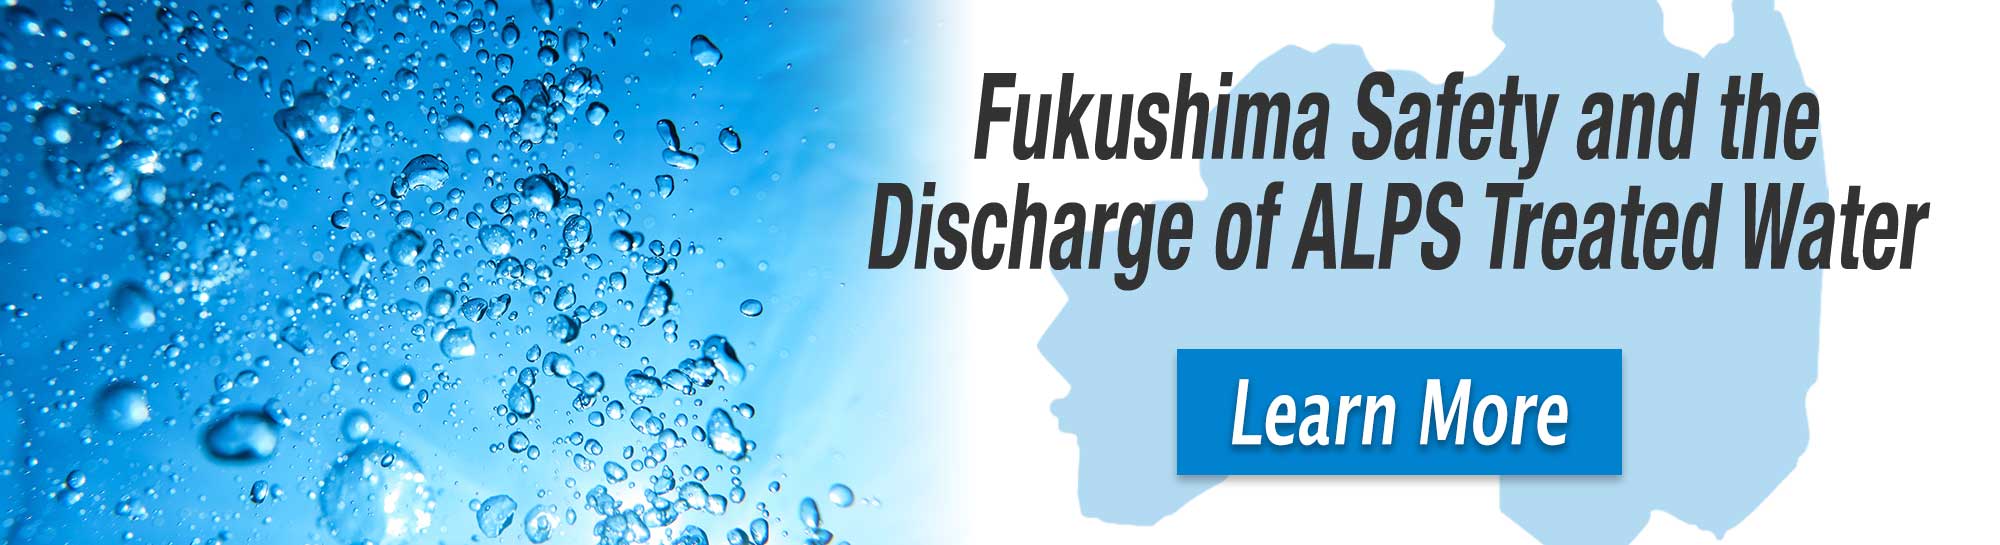 Fukushima safety and alpine treated water discharge